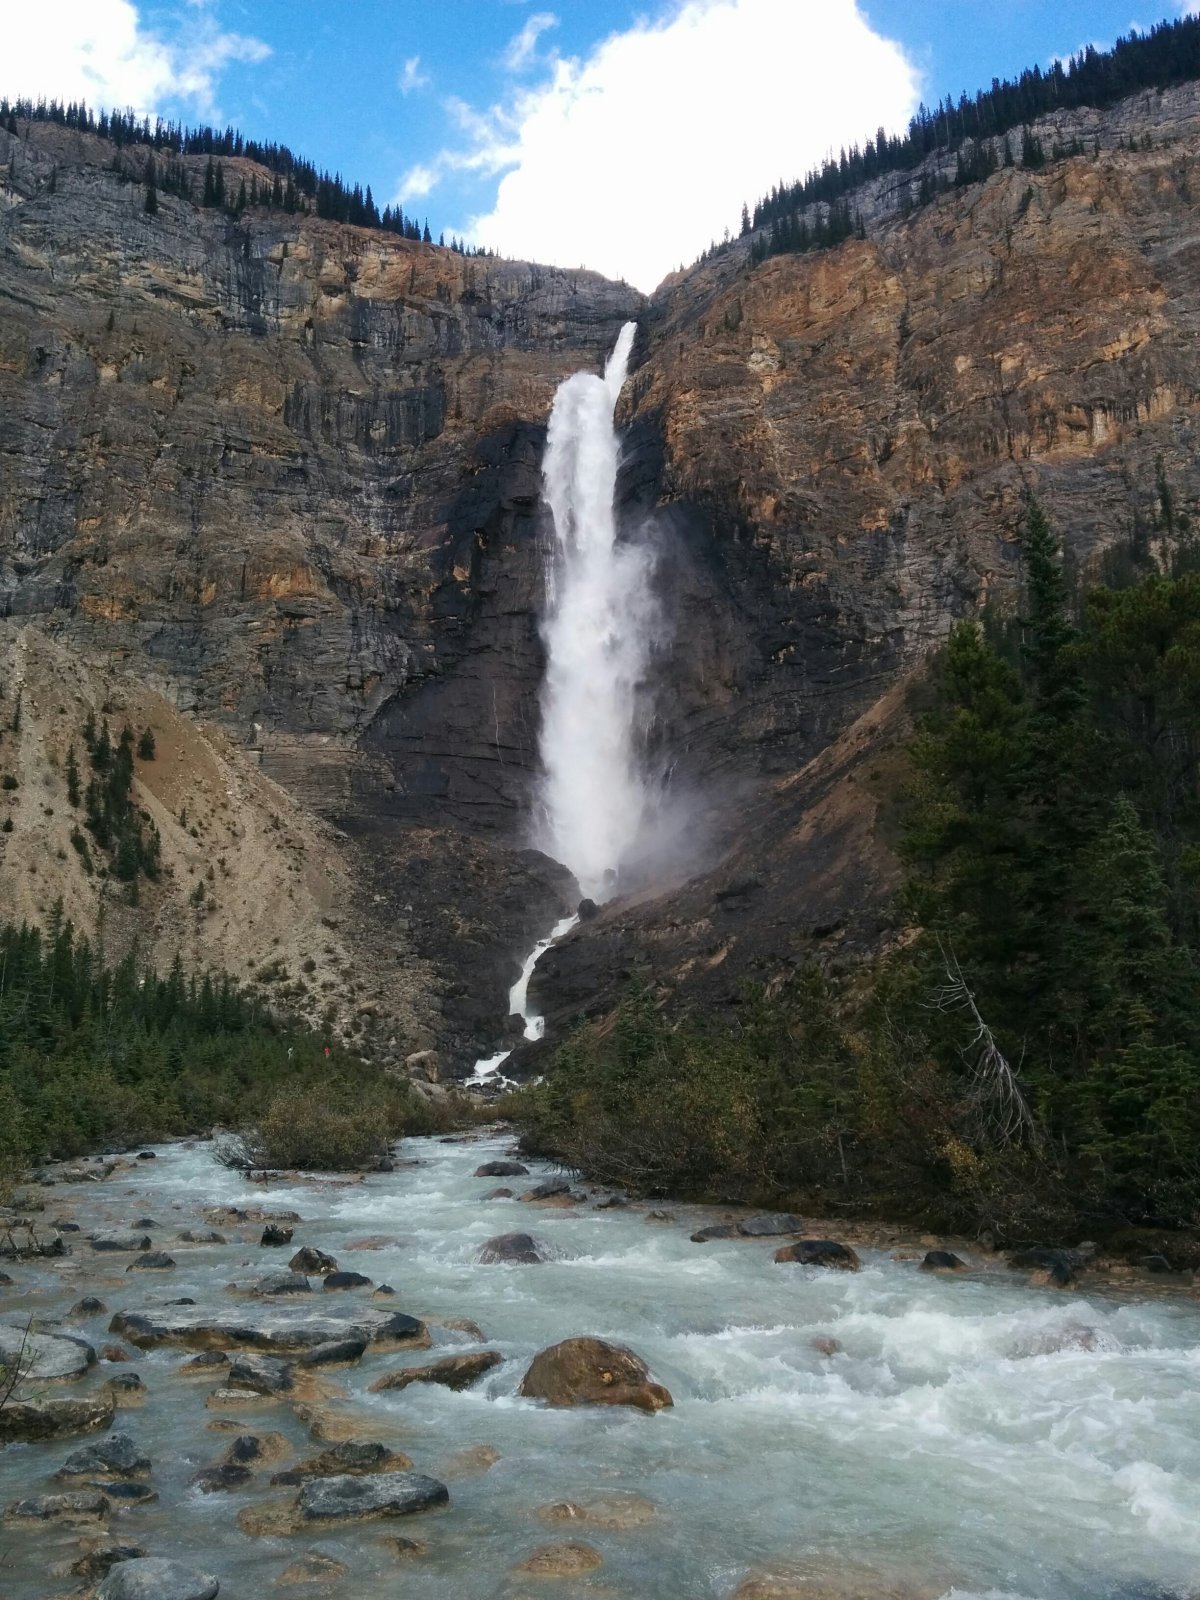 One person is dead after drowning at Takakkaw Falls in Yoho National Park on Friday.